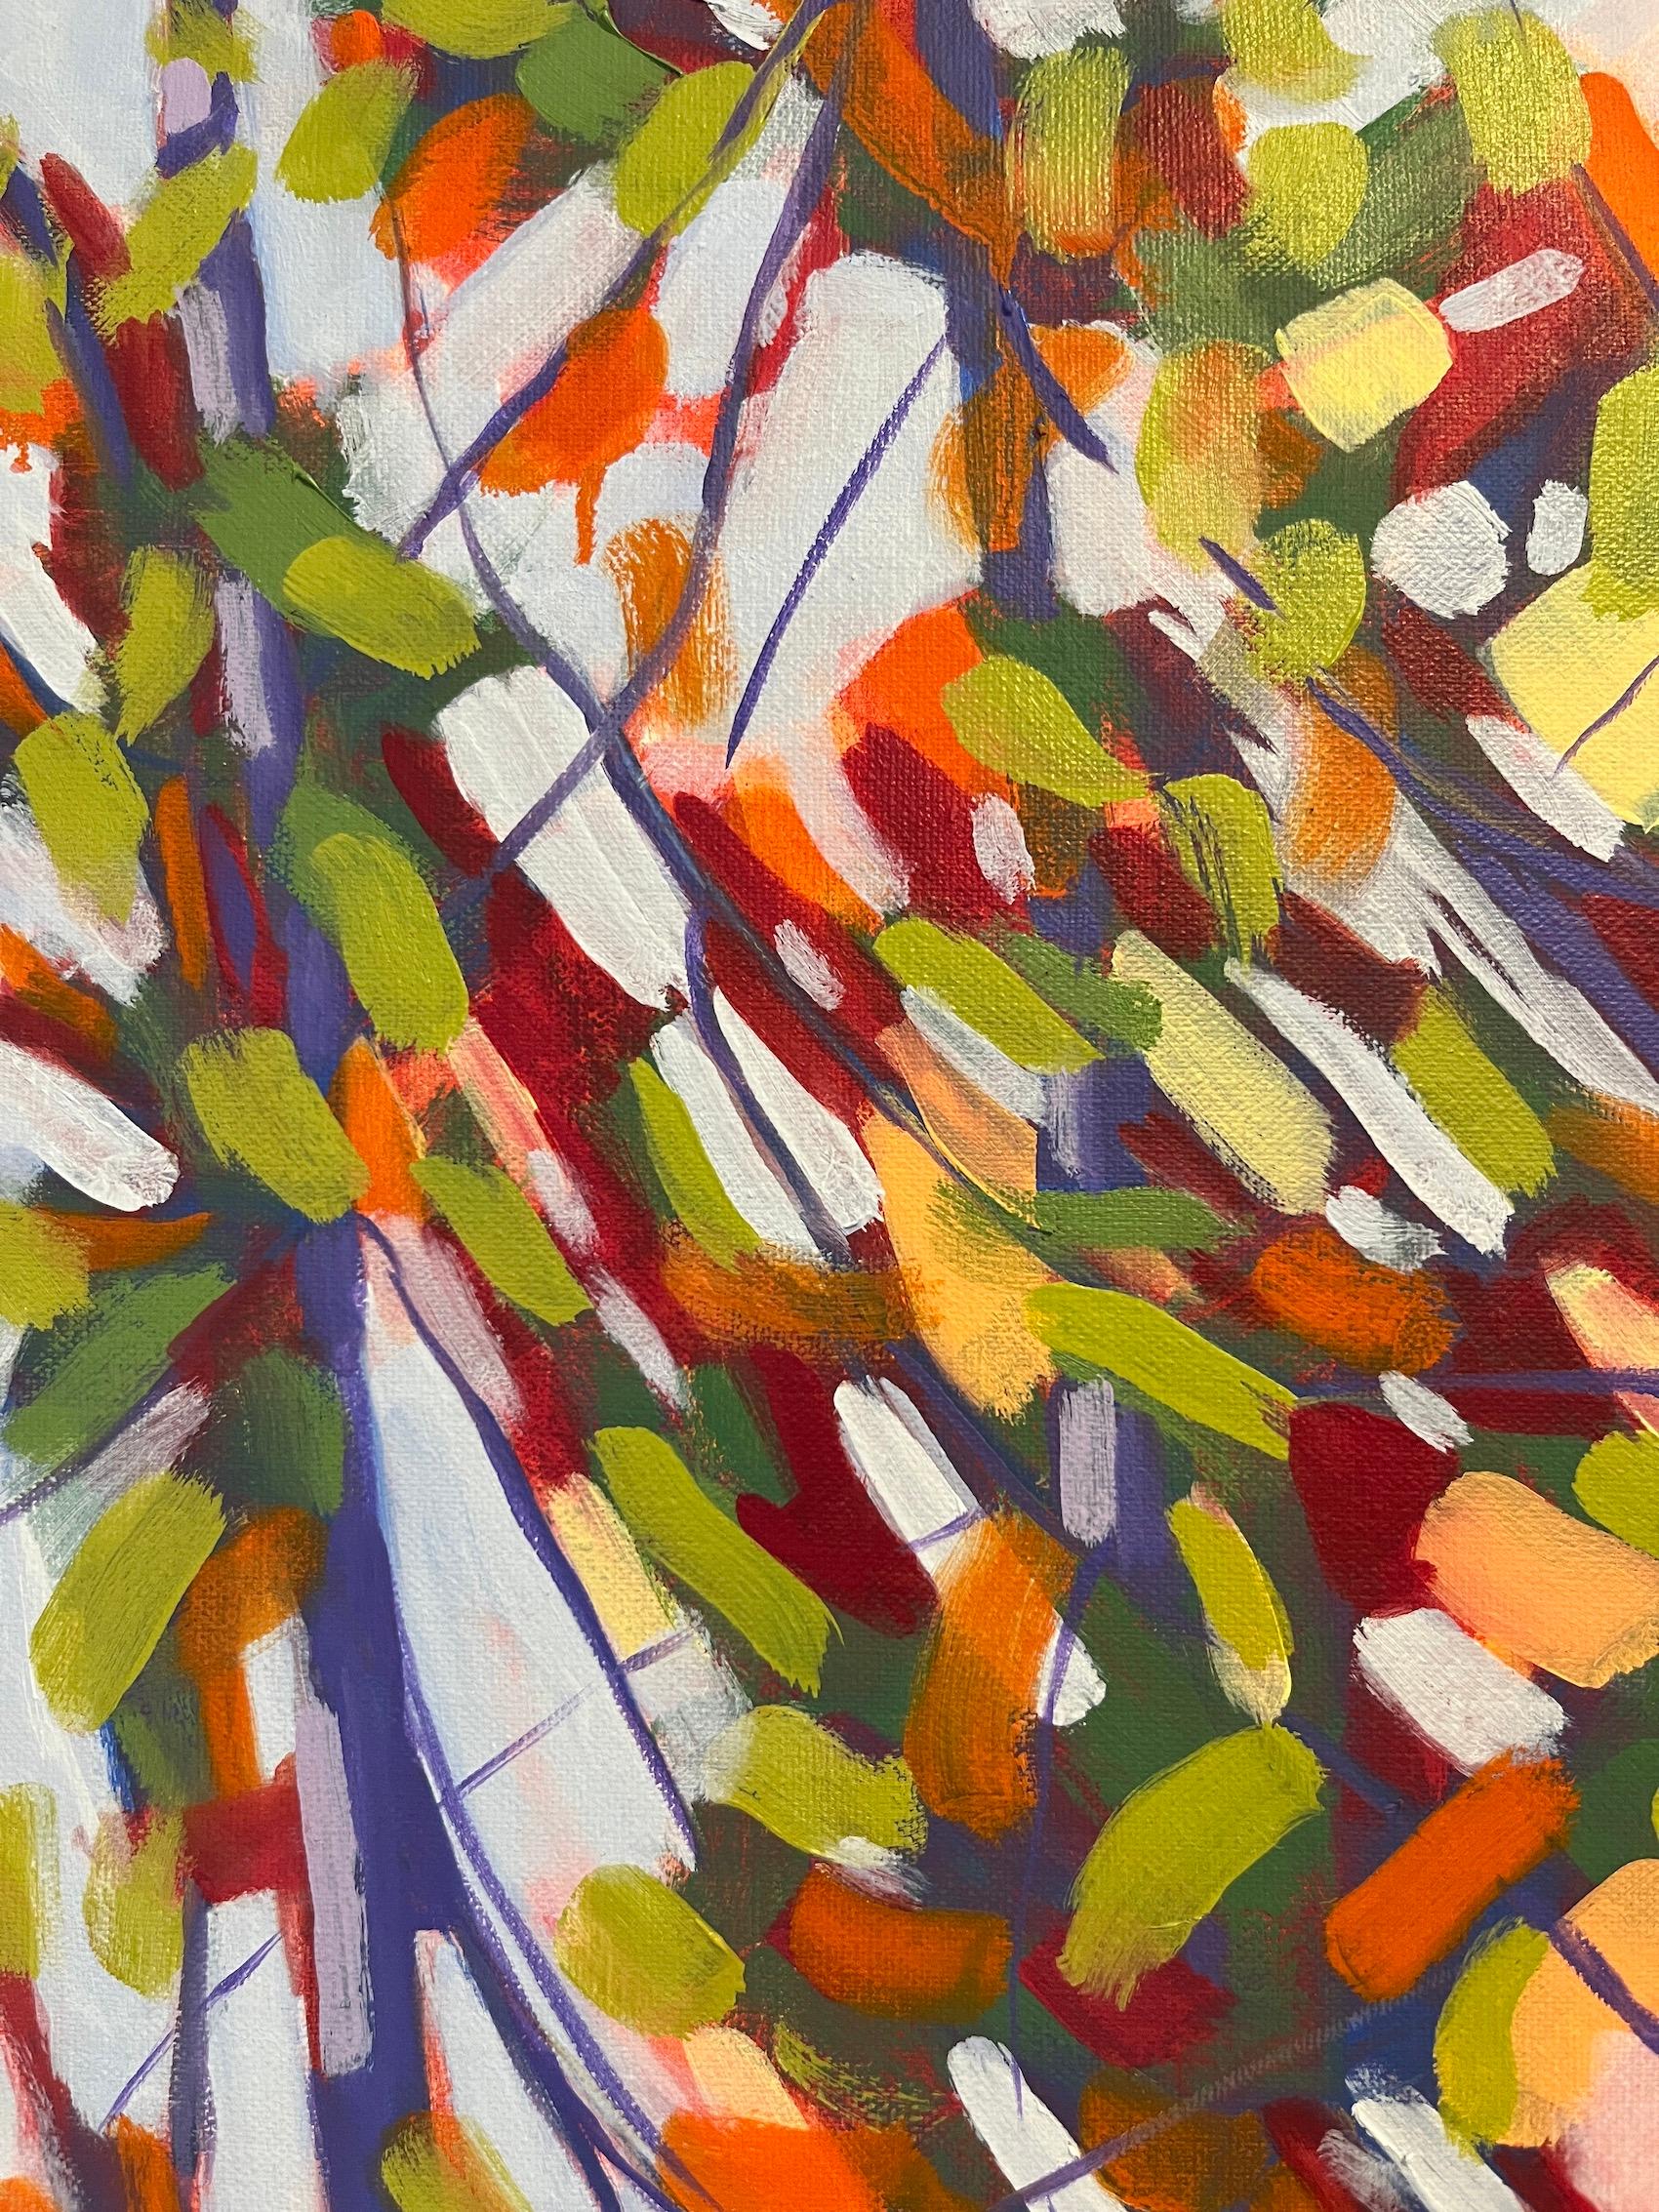 Marcia Wise’s oil painting “Accento” presents a close up view of the progression of Autumnal reds, yellows, oranges, greens and blues as she continues exploration of her tree, forest, and landscape series. This 24 x 36 oil painting lifts the spirit